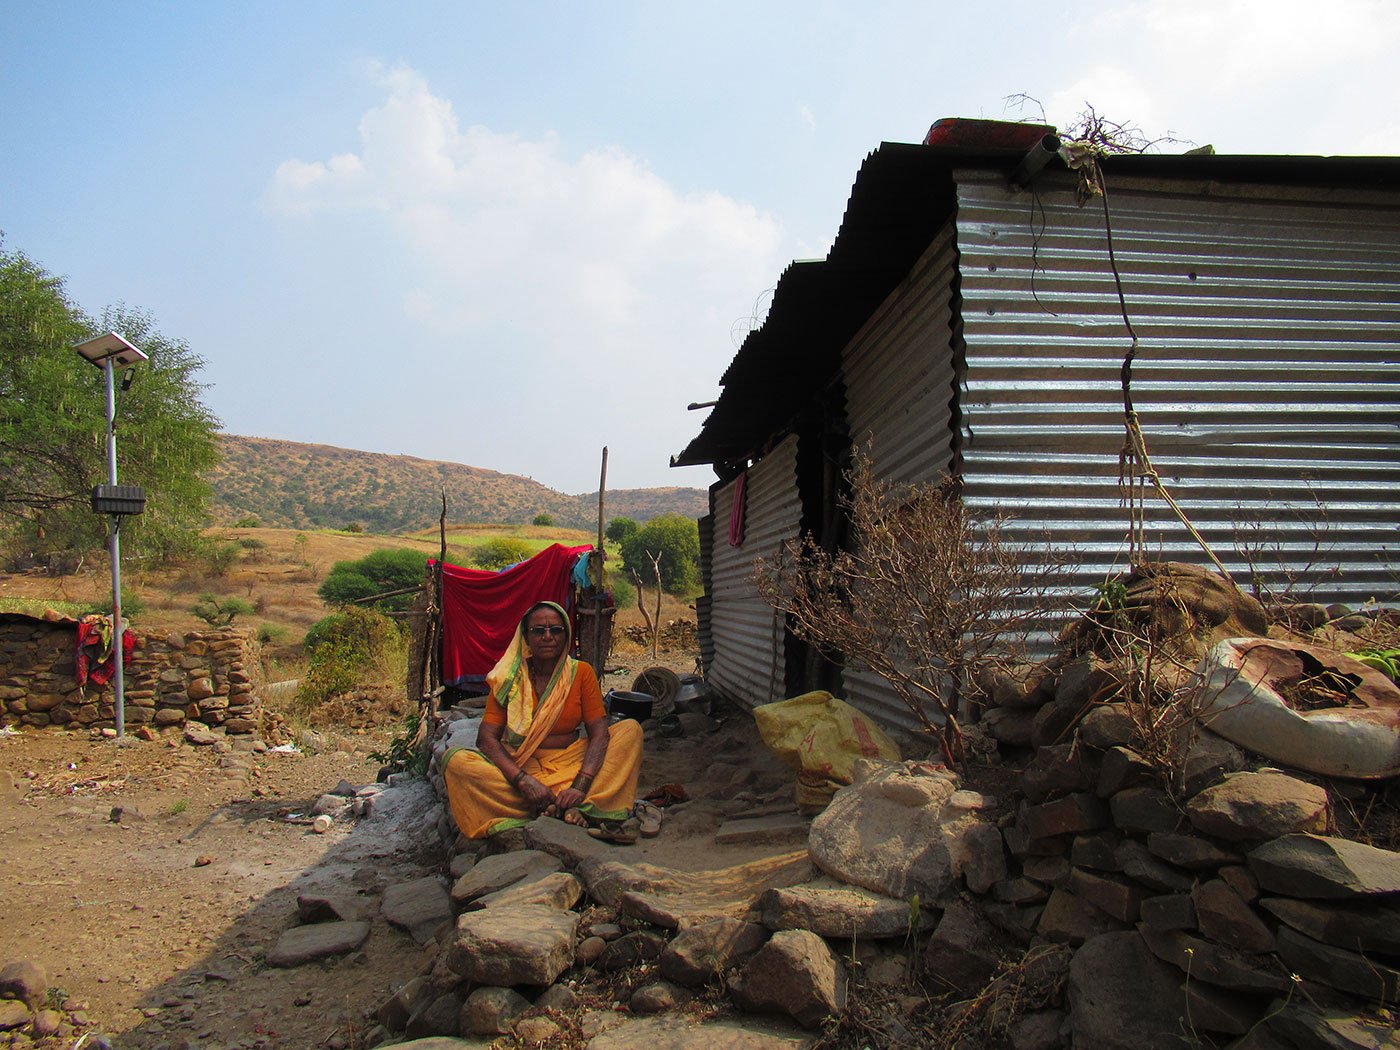 A woman sitting outside a tin house with hills in the background